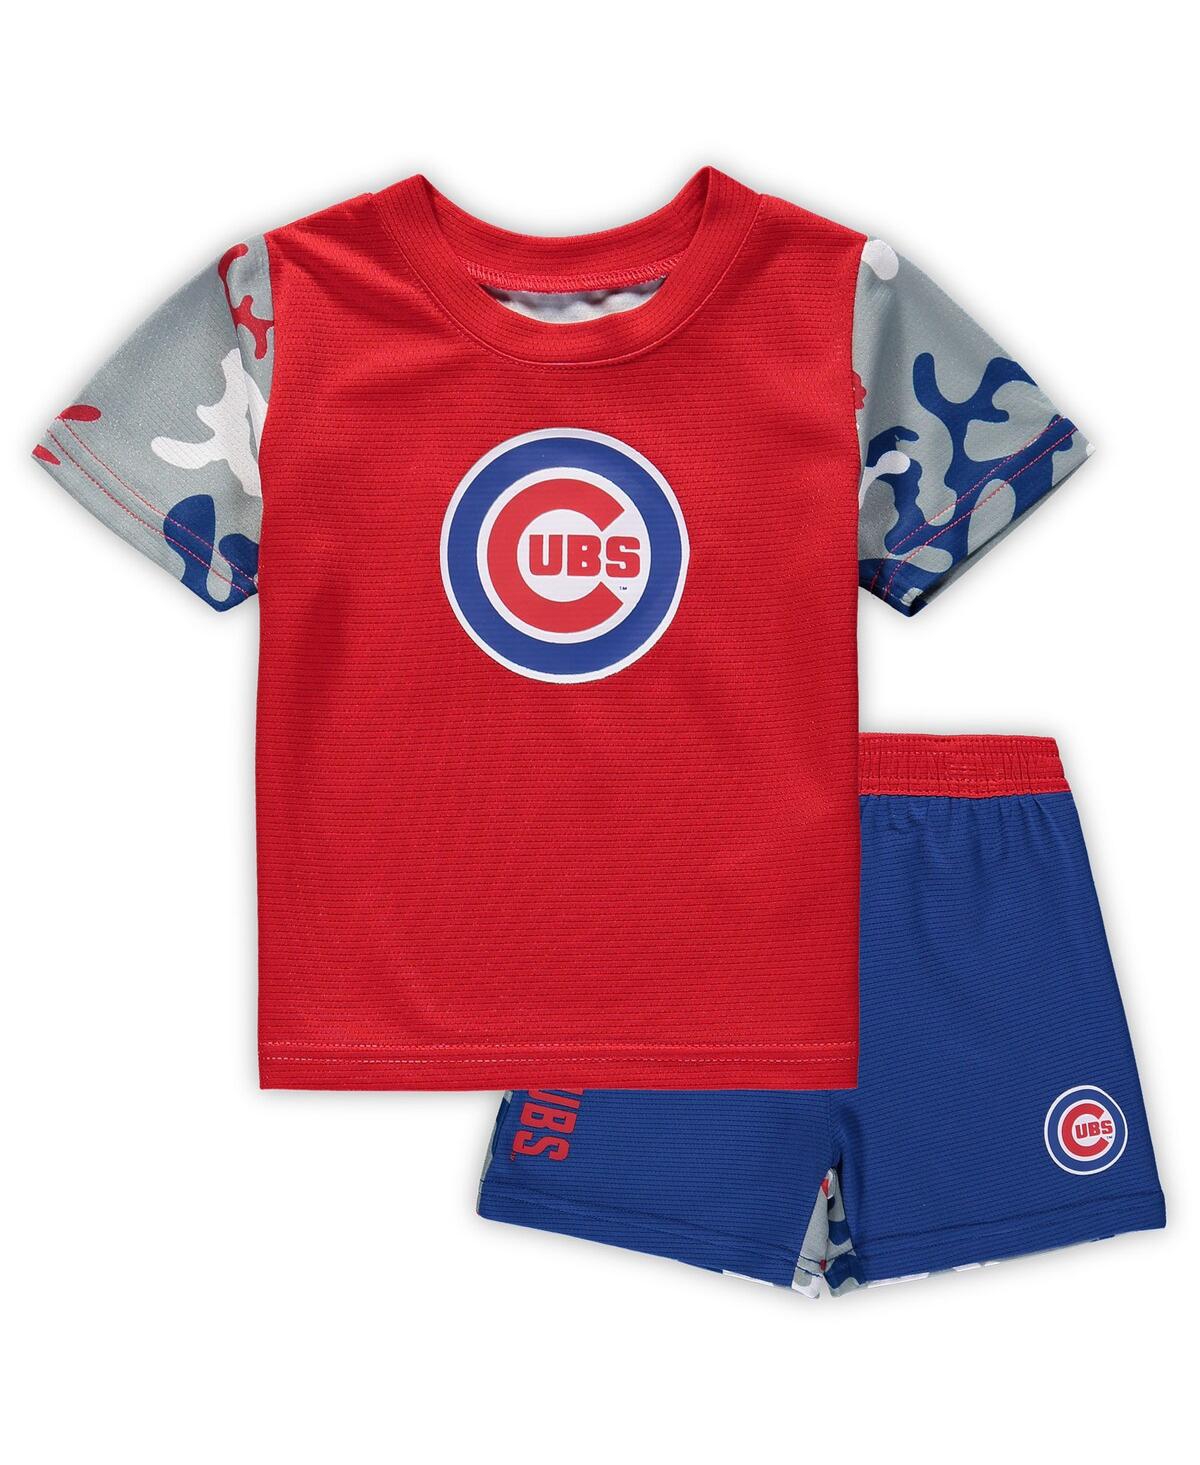 Kids Discounted Chicago Cubs Gear, Cheap Youth Cubs Apparel